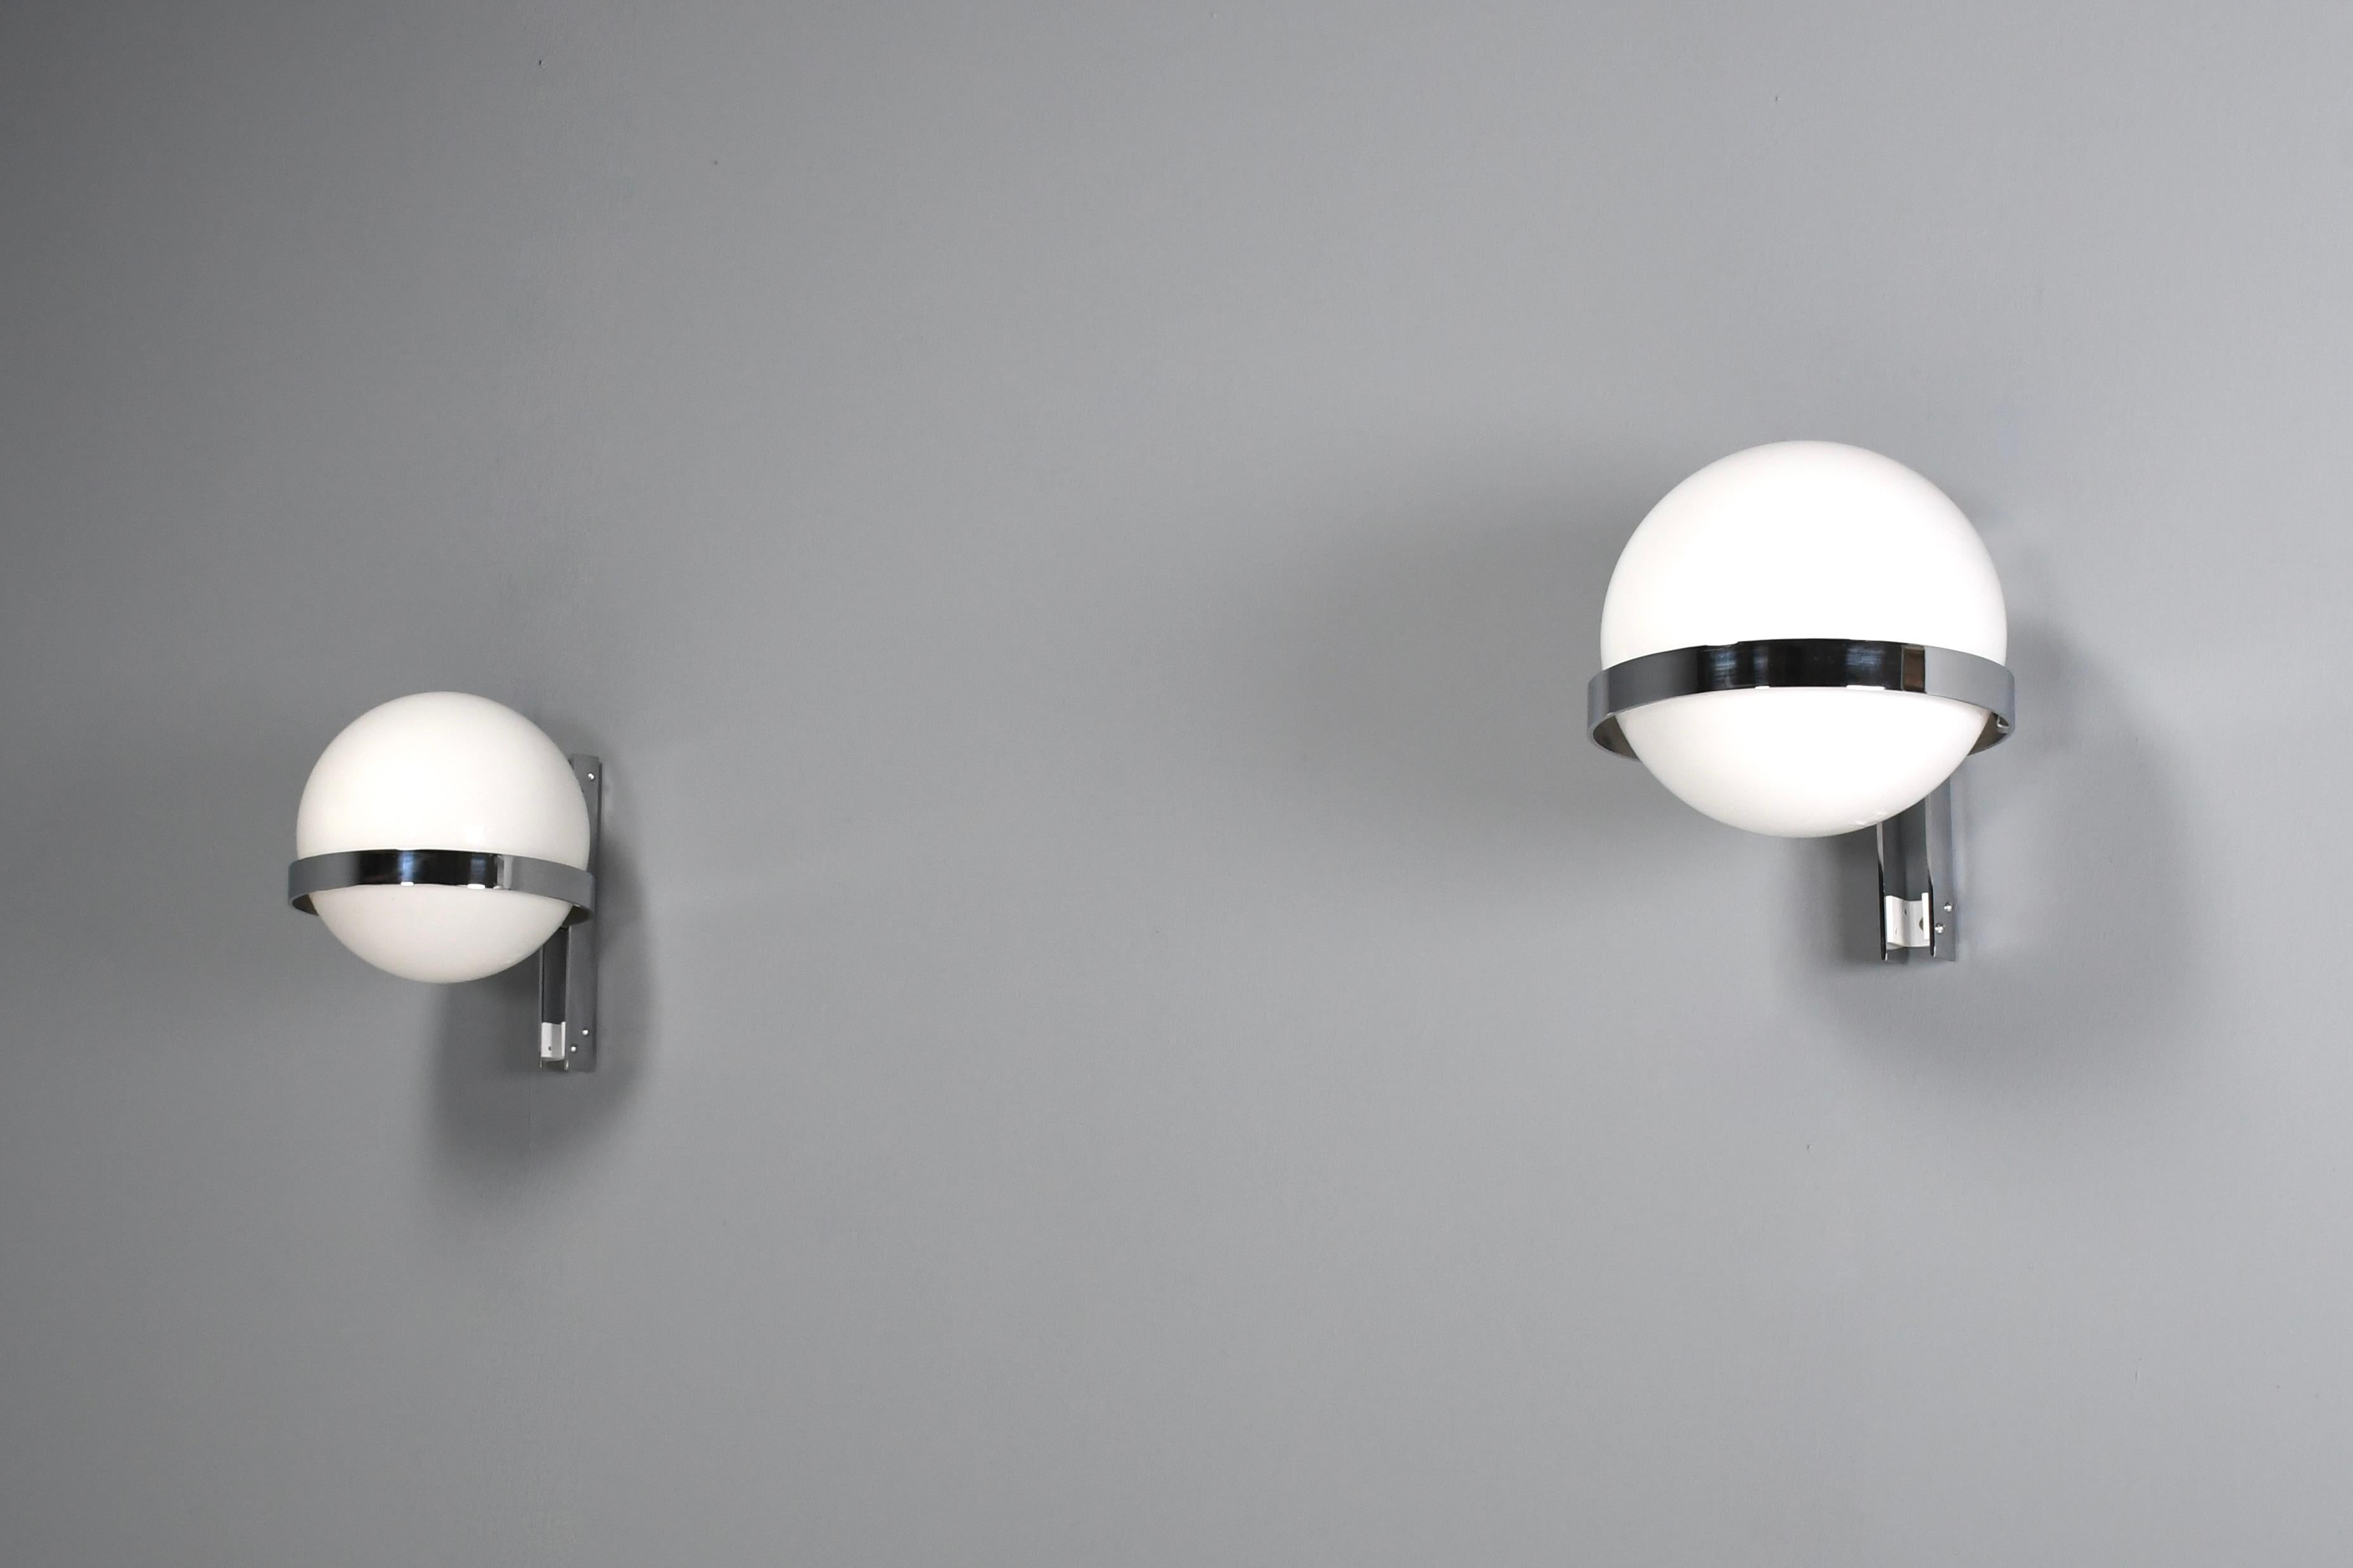 MBM Sconces by Martorell, Bohigas and Mackay for Polinax, Spain, 1964 For Sale 1